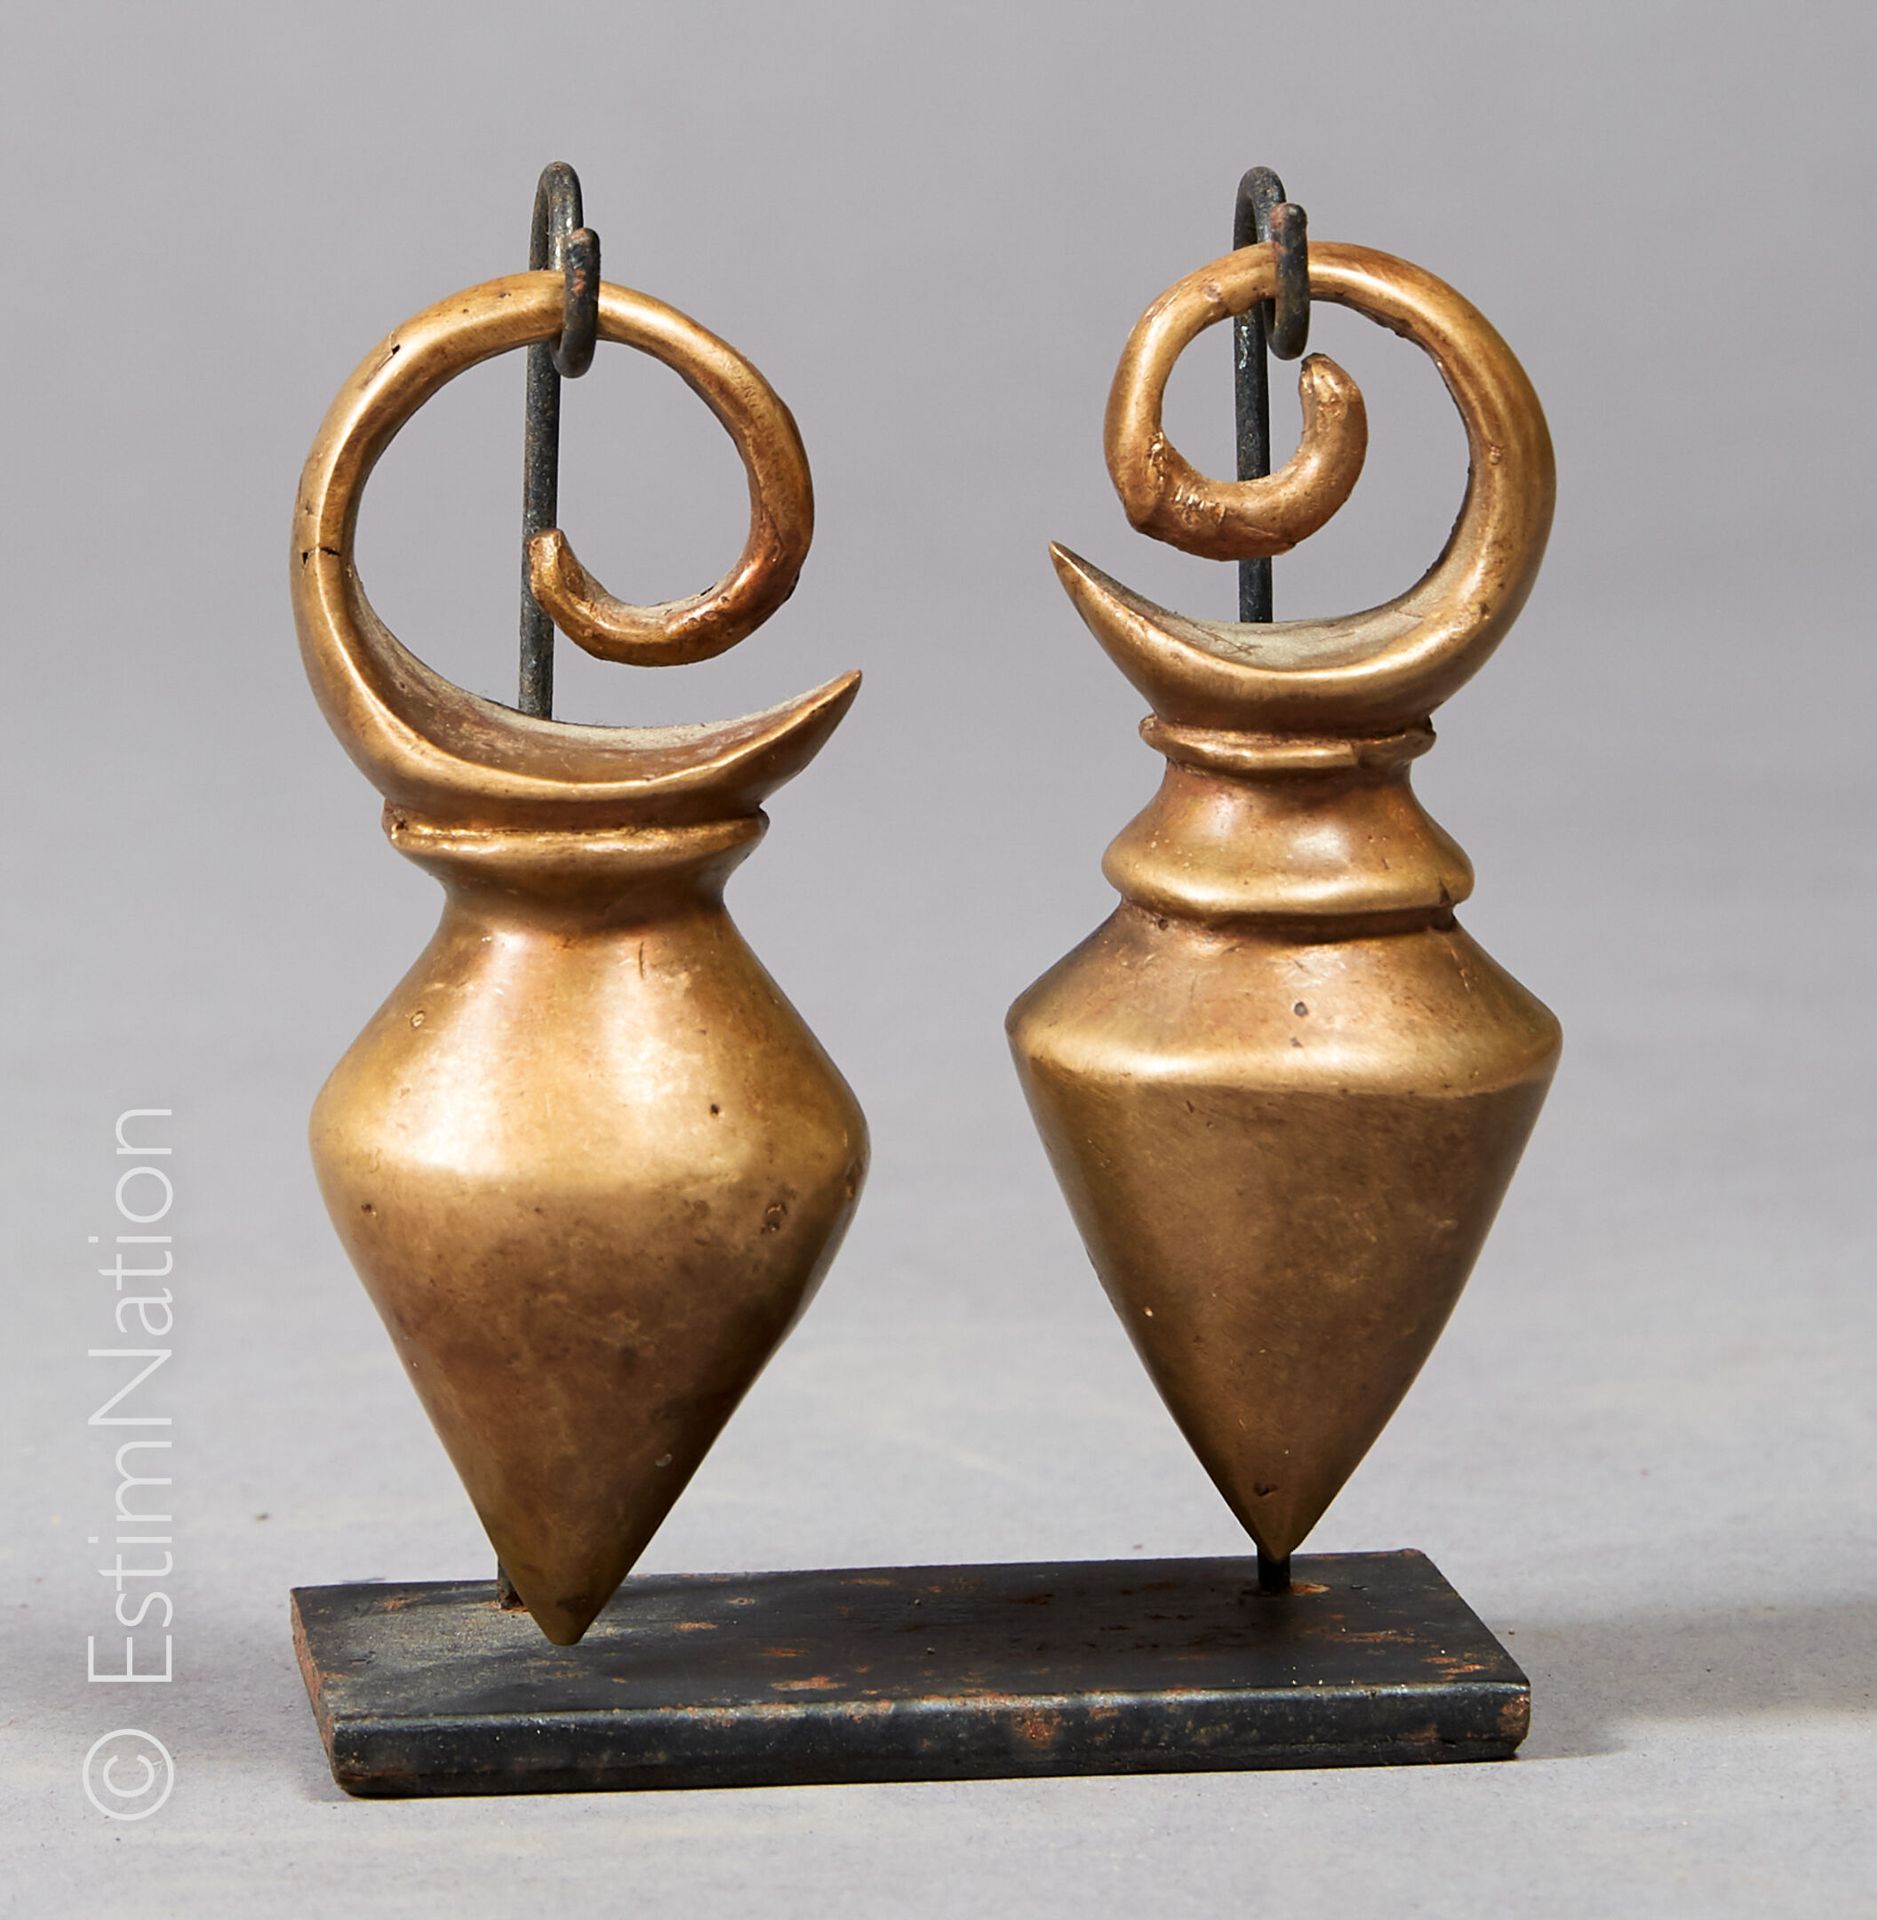 DAYAK - BORNEO DAYAK - BORNEO



Pair of conical earrings in bronze.

Small blac&hellip;